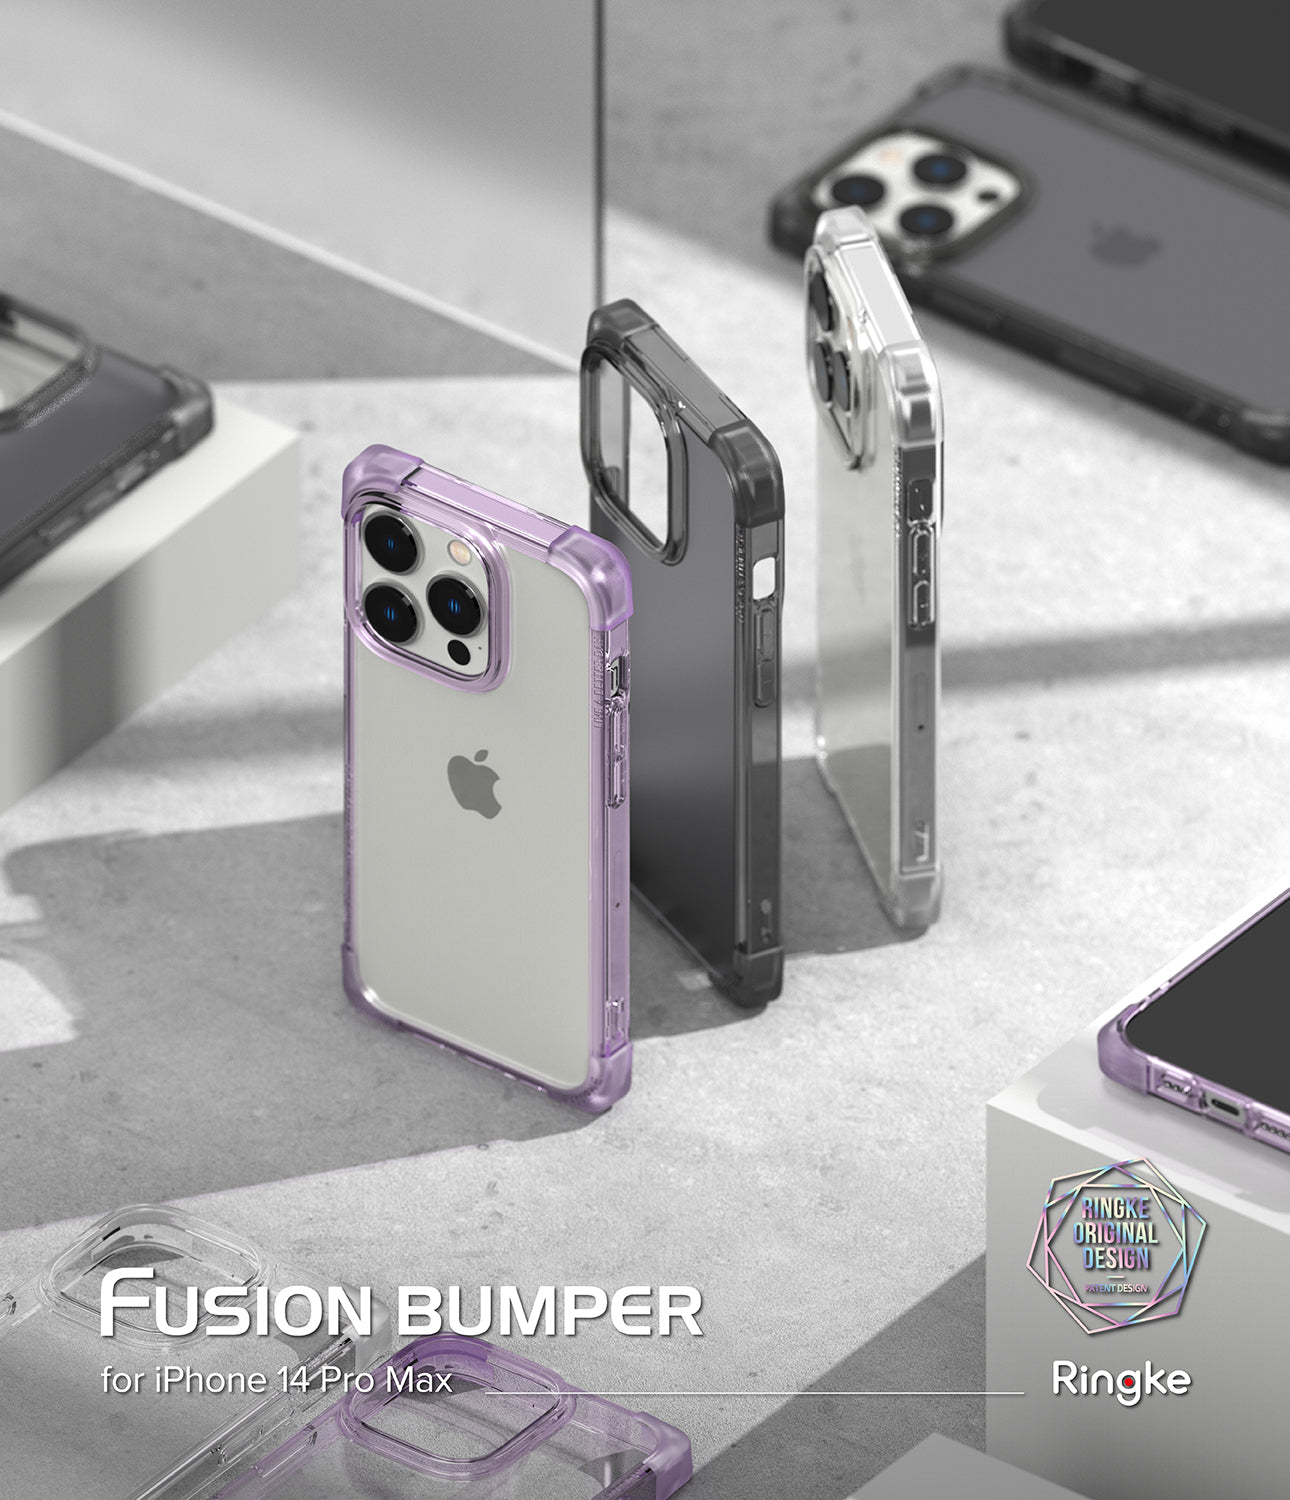 Fusion Bumper for iPhone 14 Pro Max - Ringke